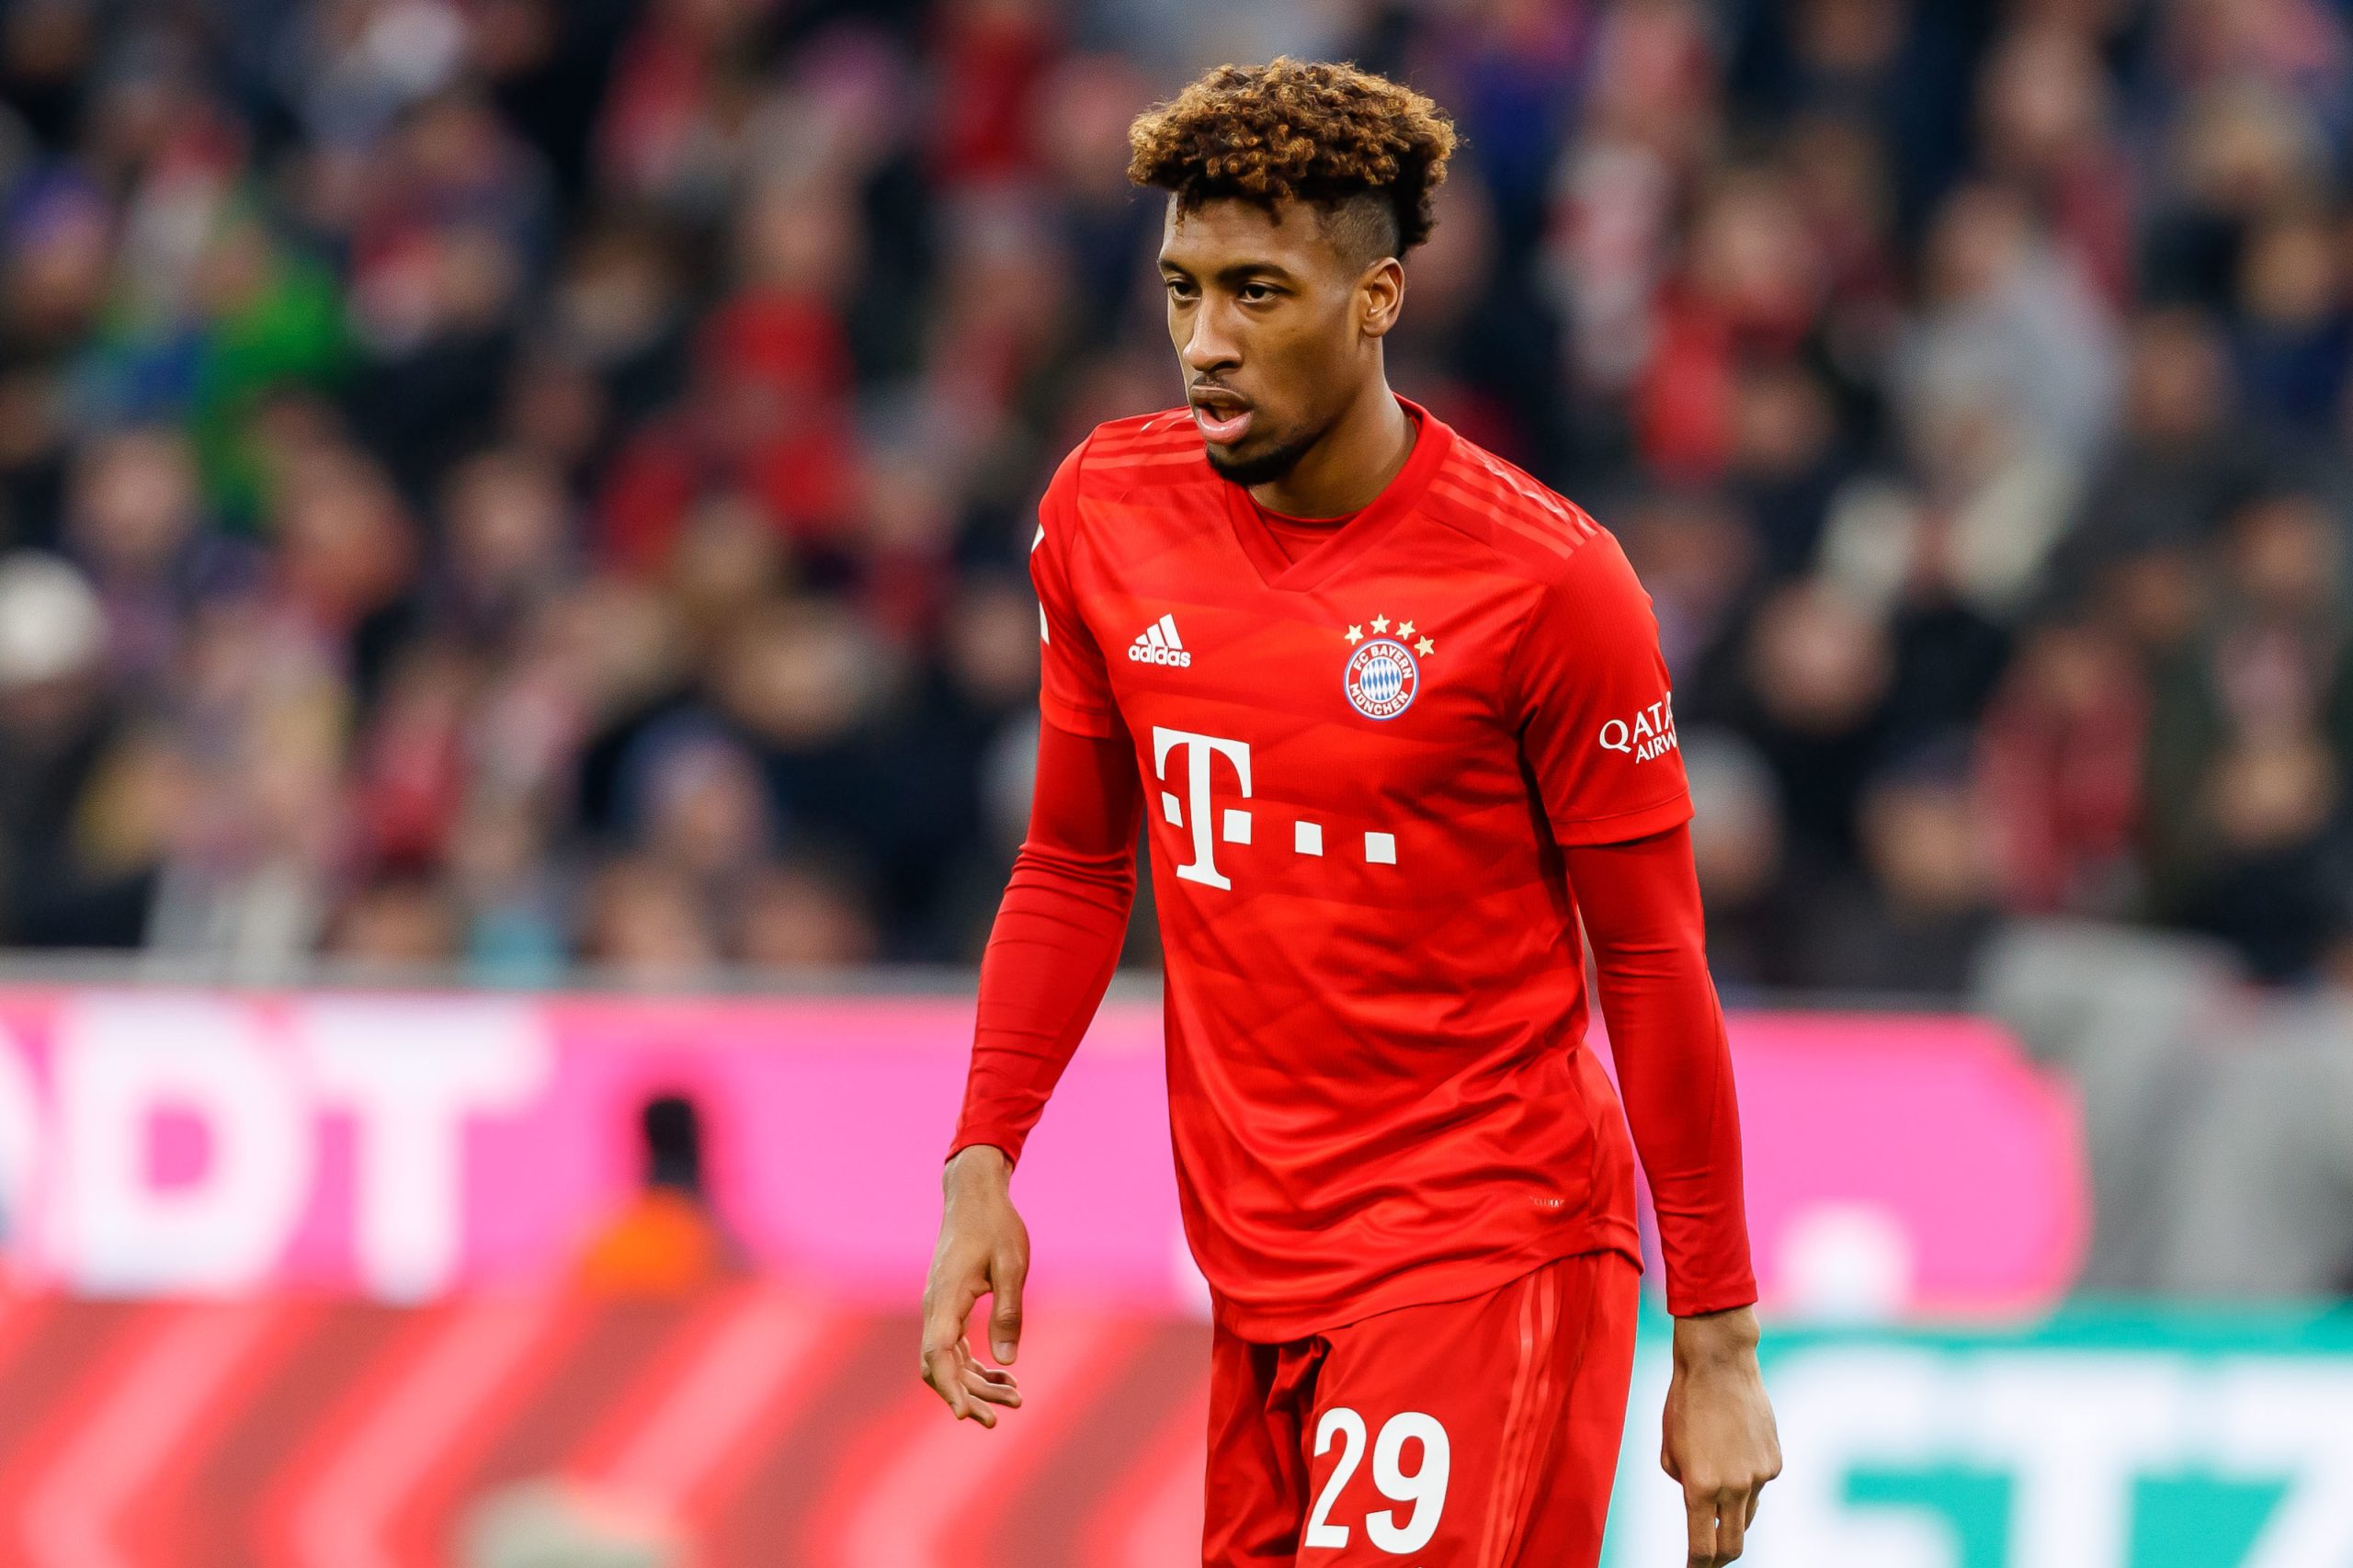 Transfer News: Chelsea target Kingsley Coman to sign a contract extension with Bayern Munich.